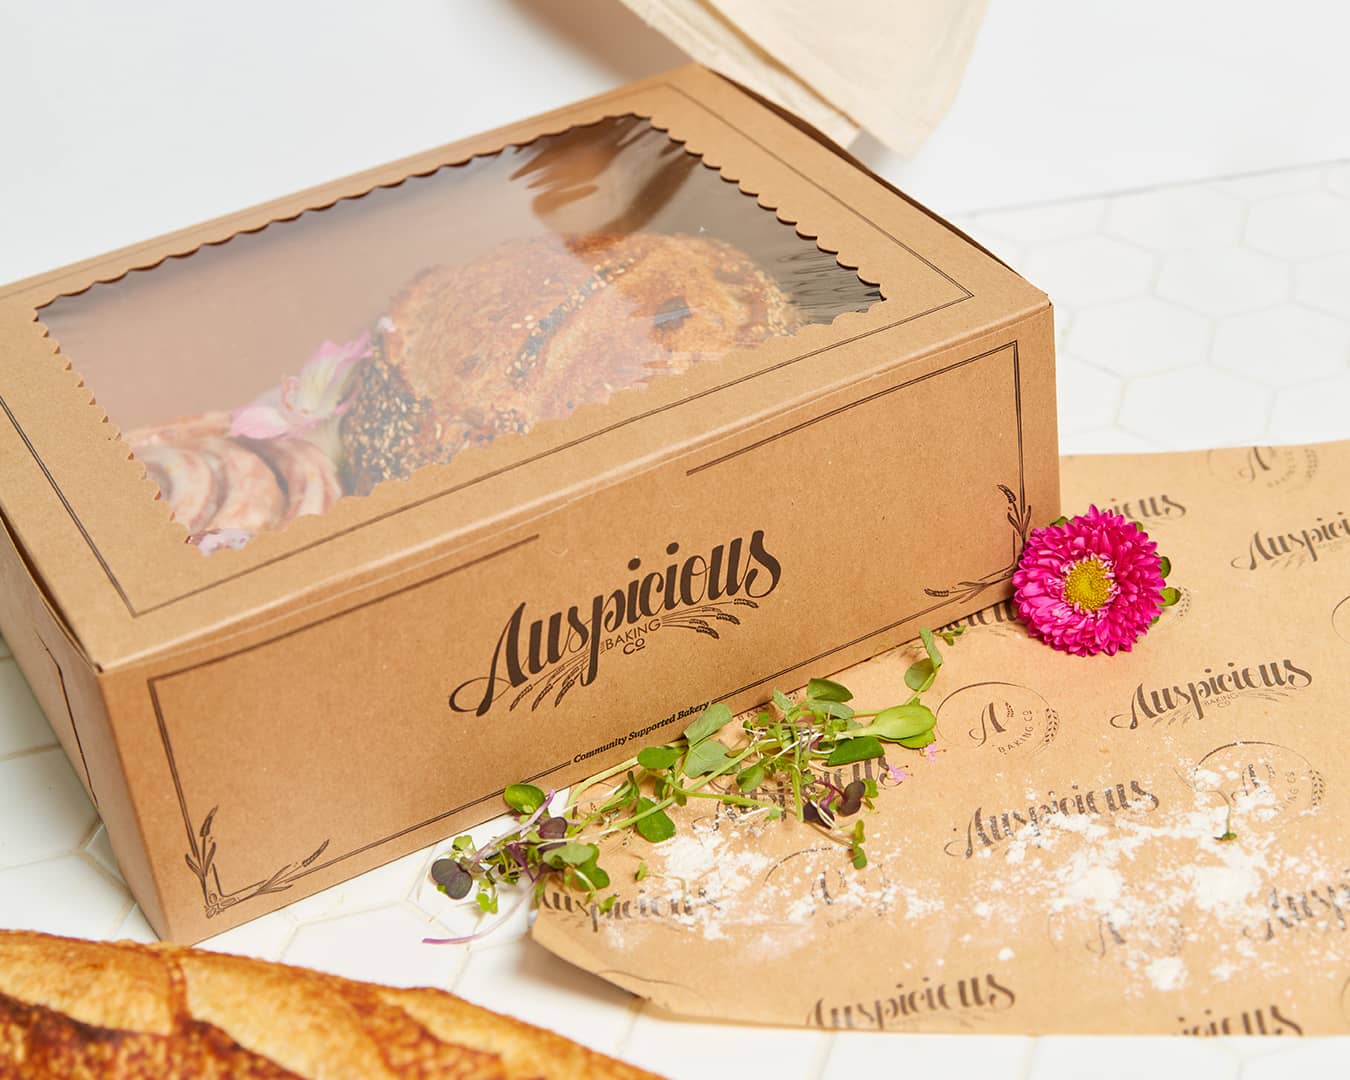 Custom box design & deli paper created for Auspicious Baking Co by Olive Ridley Studios